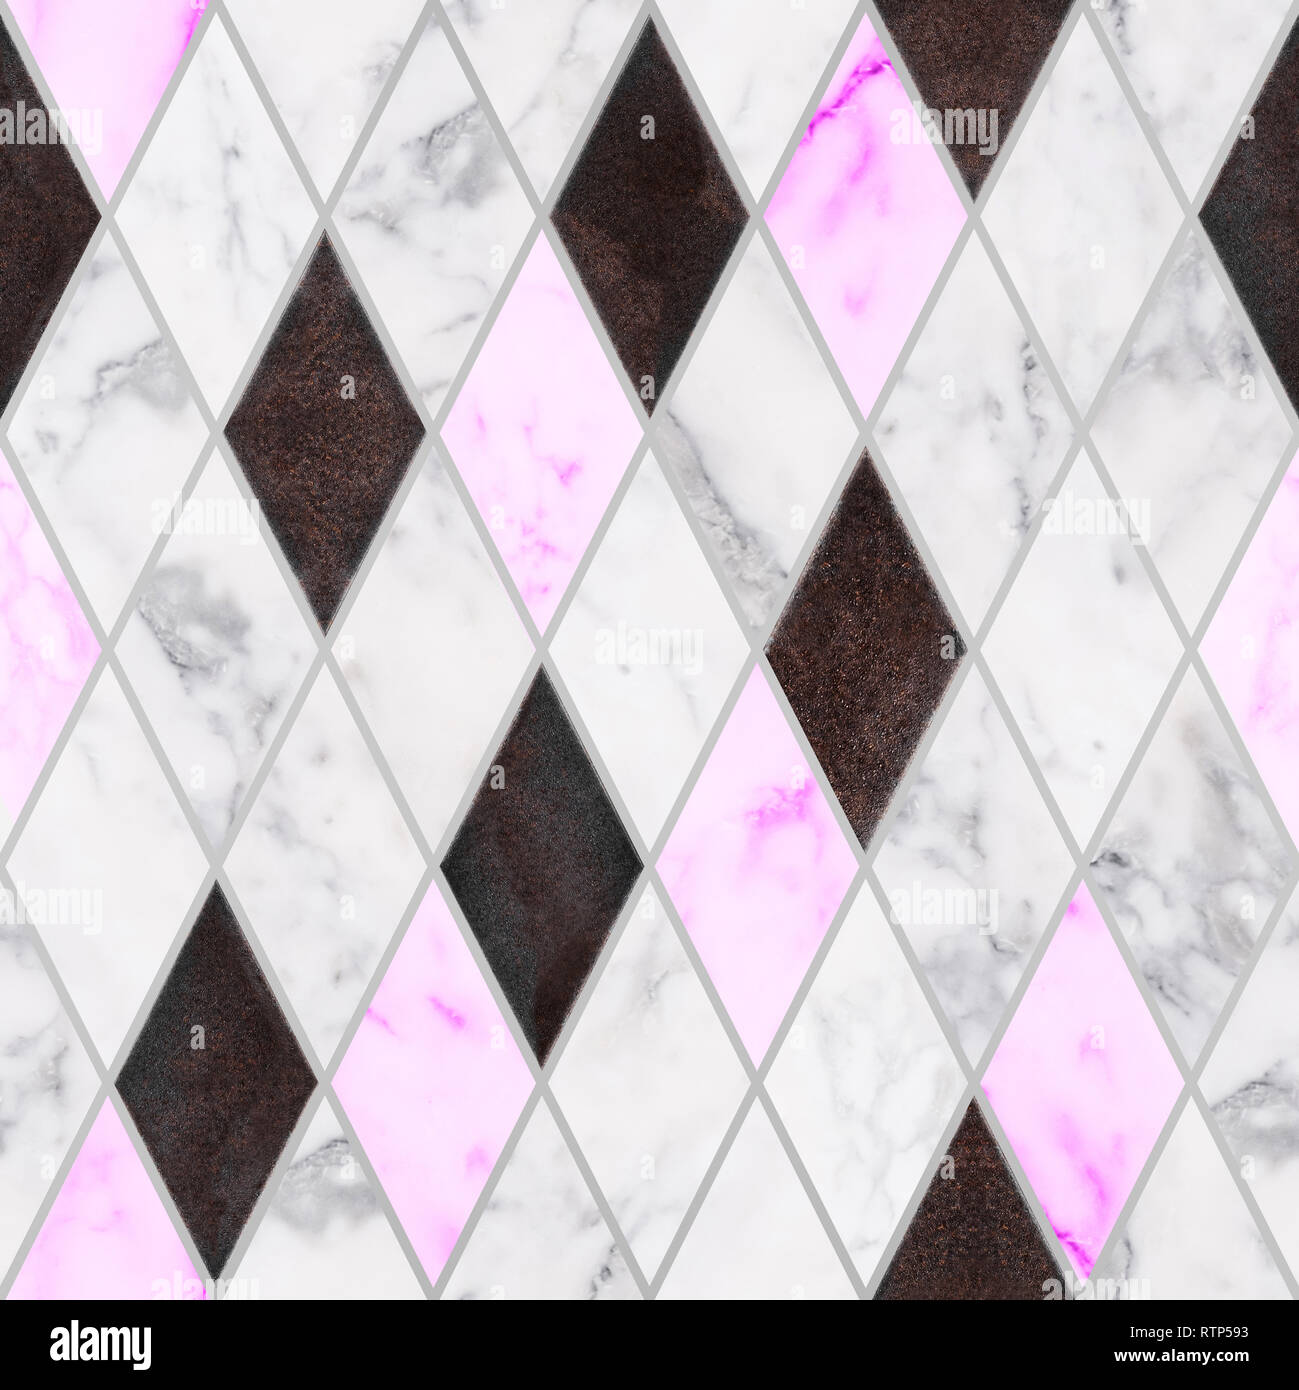 Seamless white and pink marble stone with rusty metal texture in rhombus pattern. Luxury marble stone decorations Stock Photo